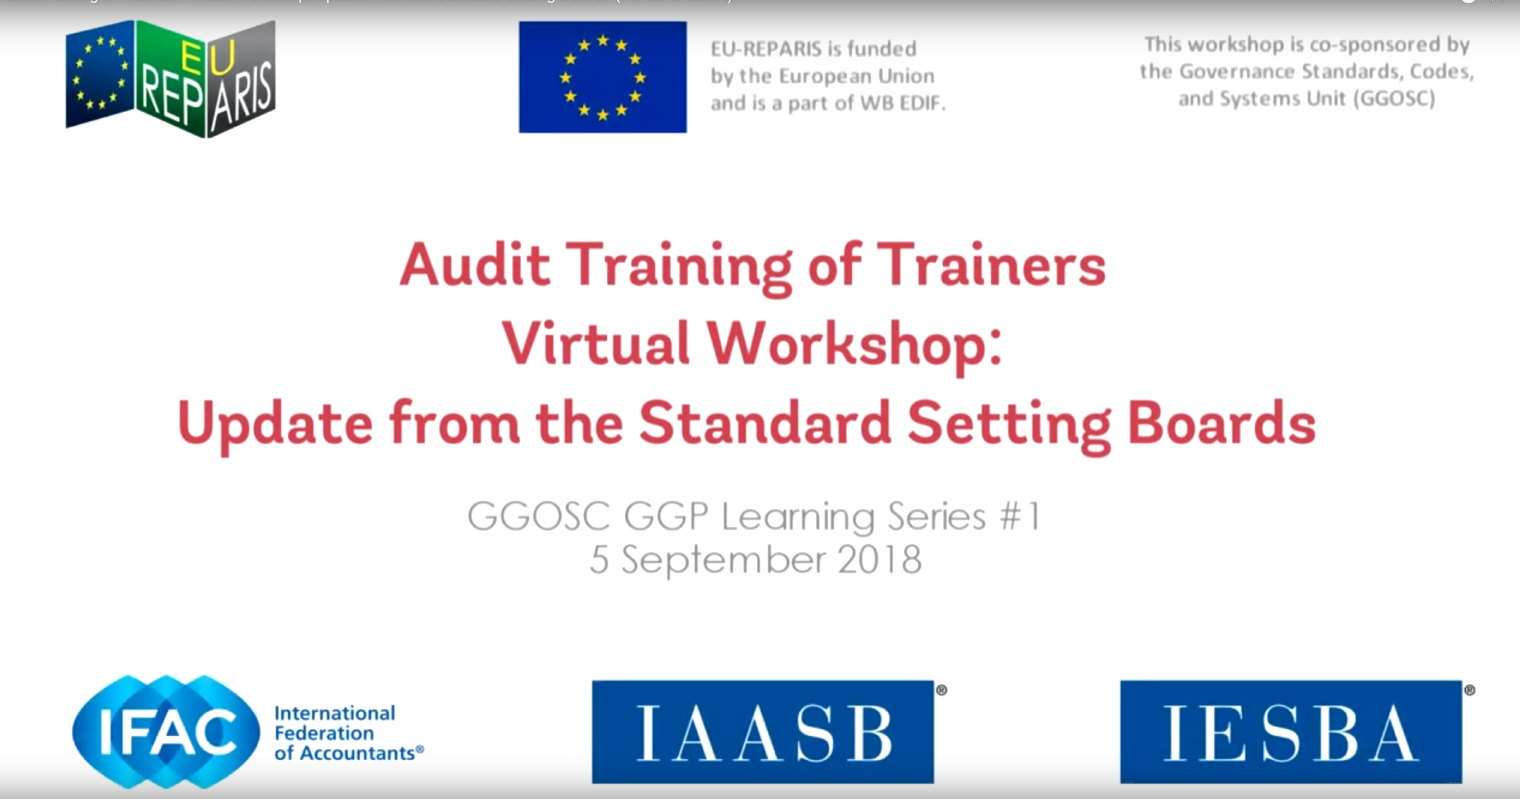 Audit Training of Trainers Virtual Workshop: Update from the Standard Setting Boards